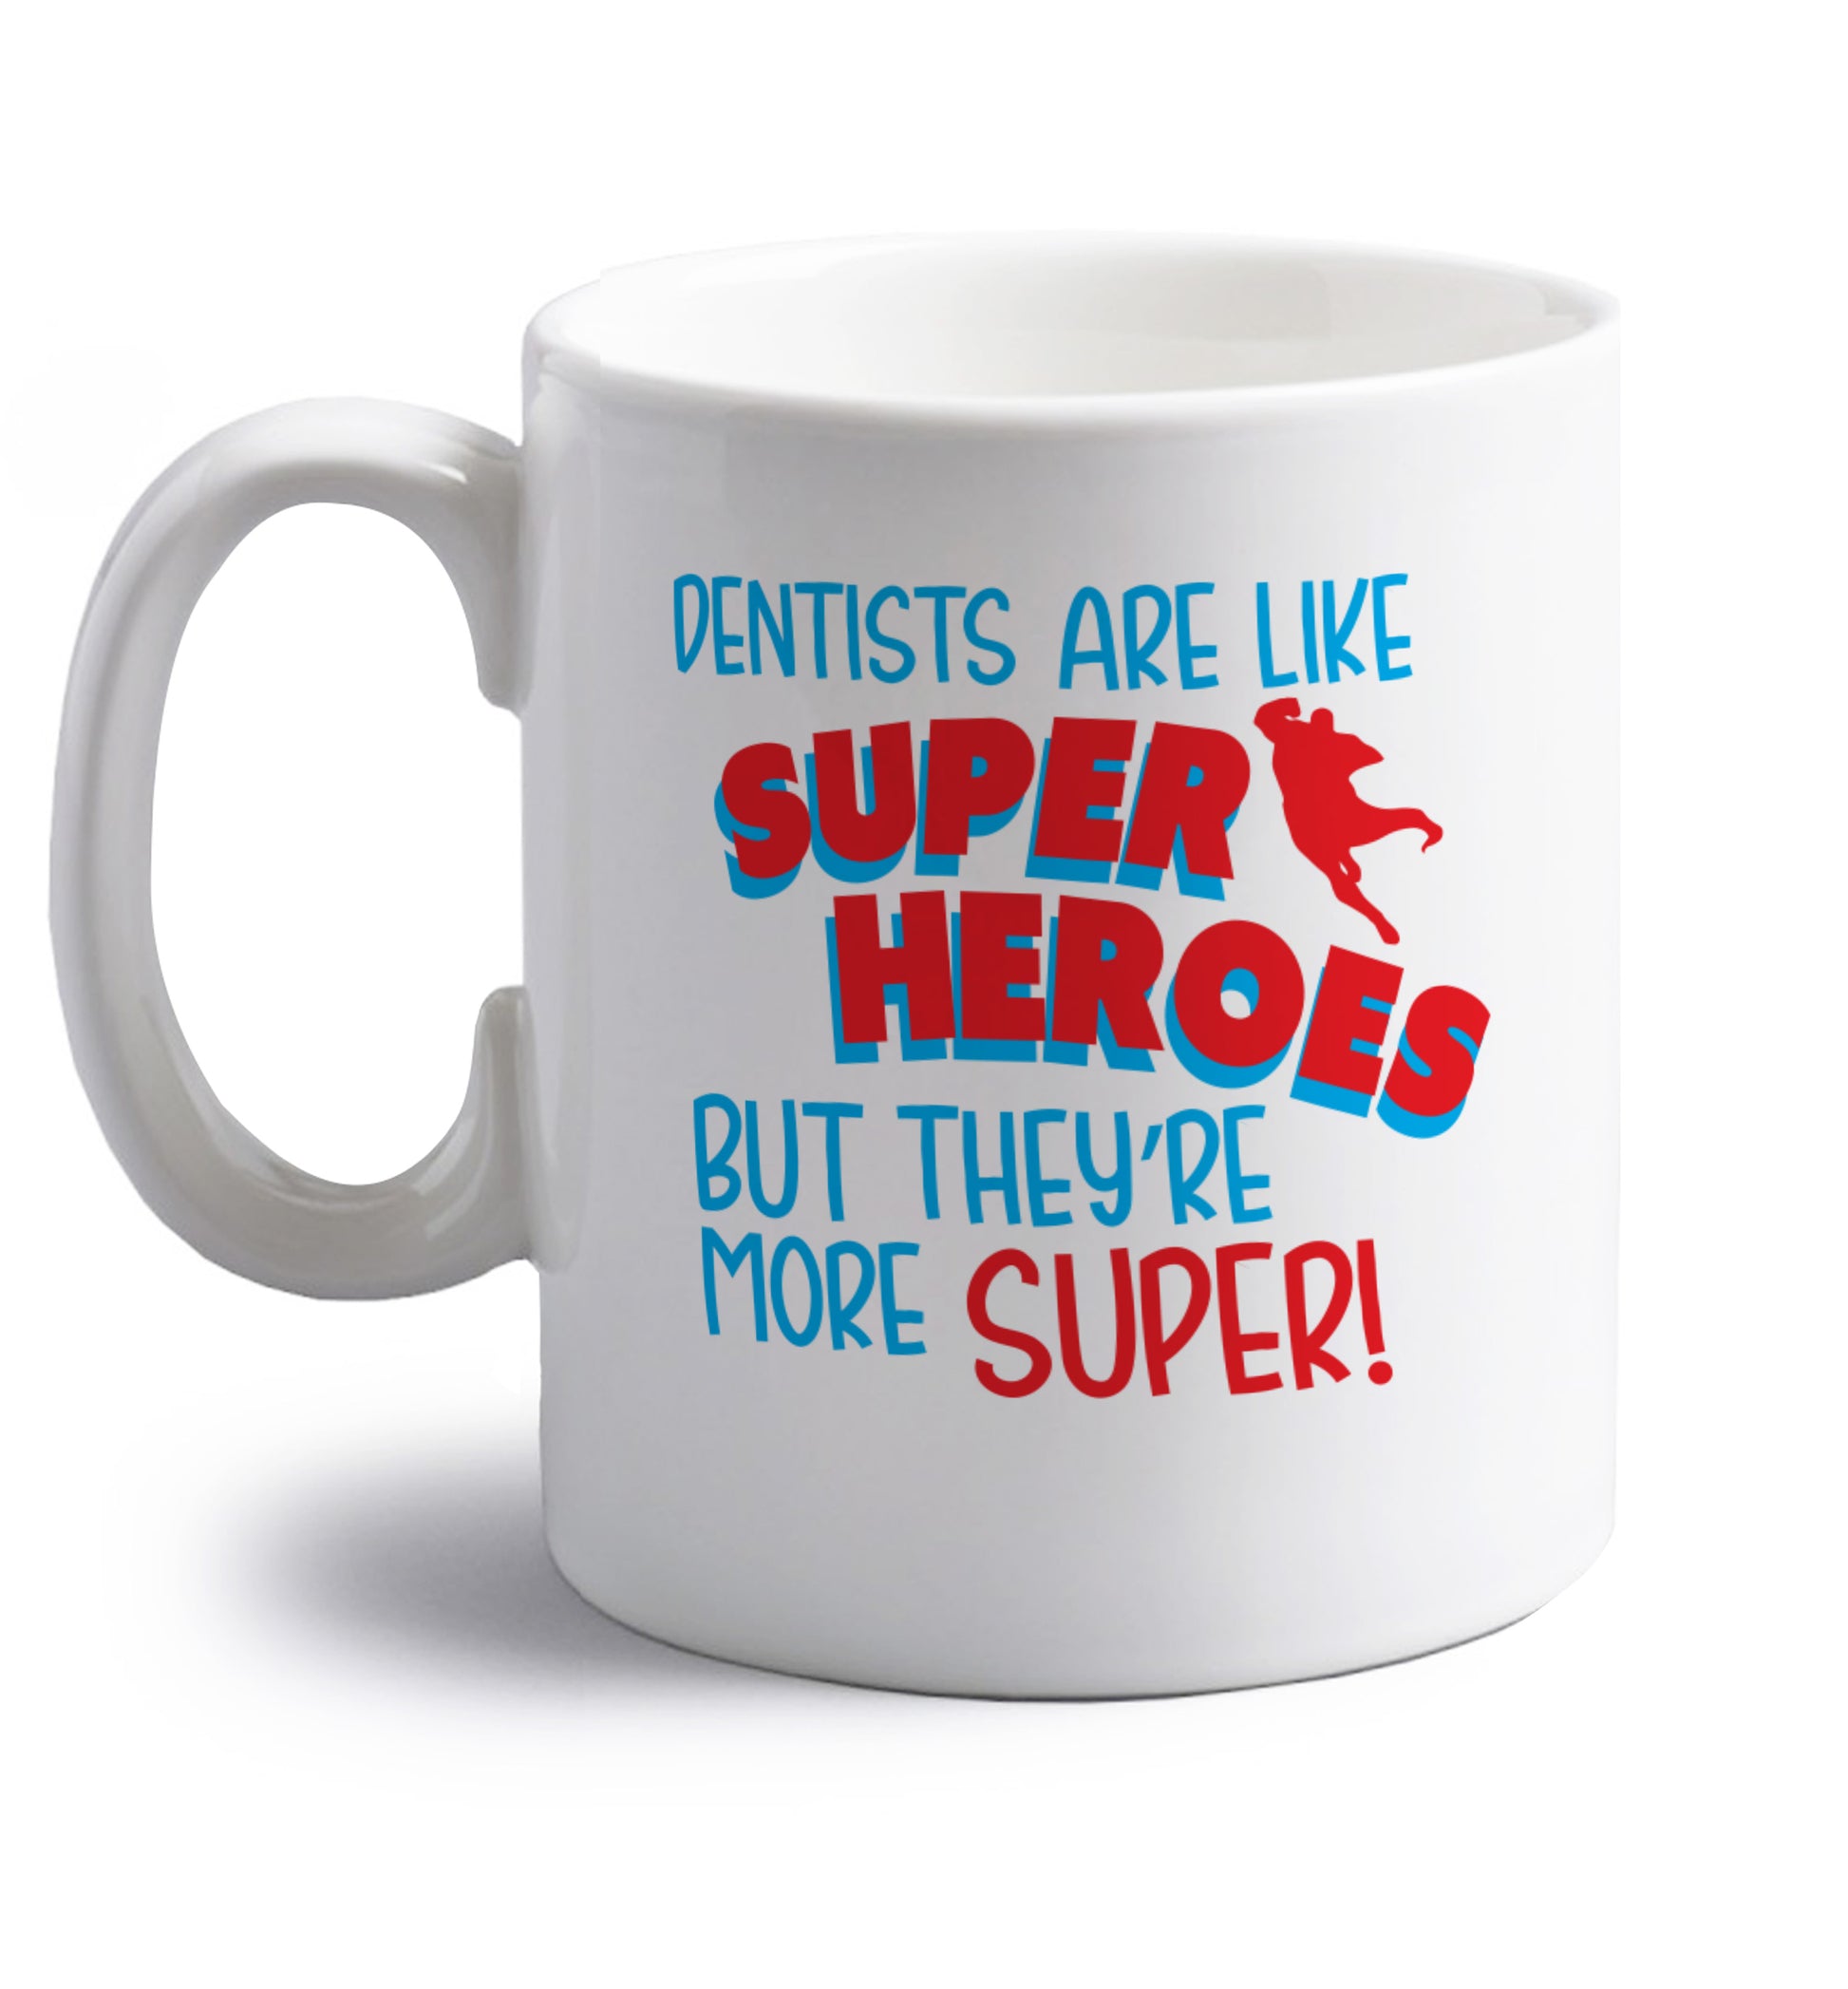 Dentists are like superheros but they're more super right handed white ceramic mug 